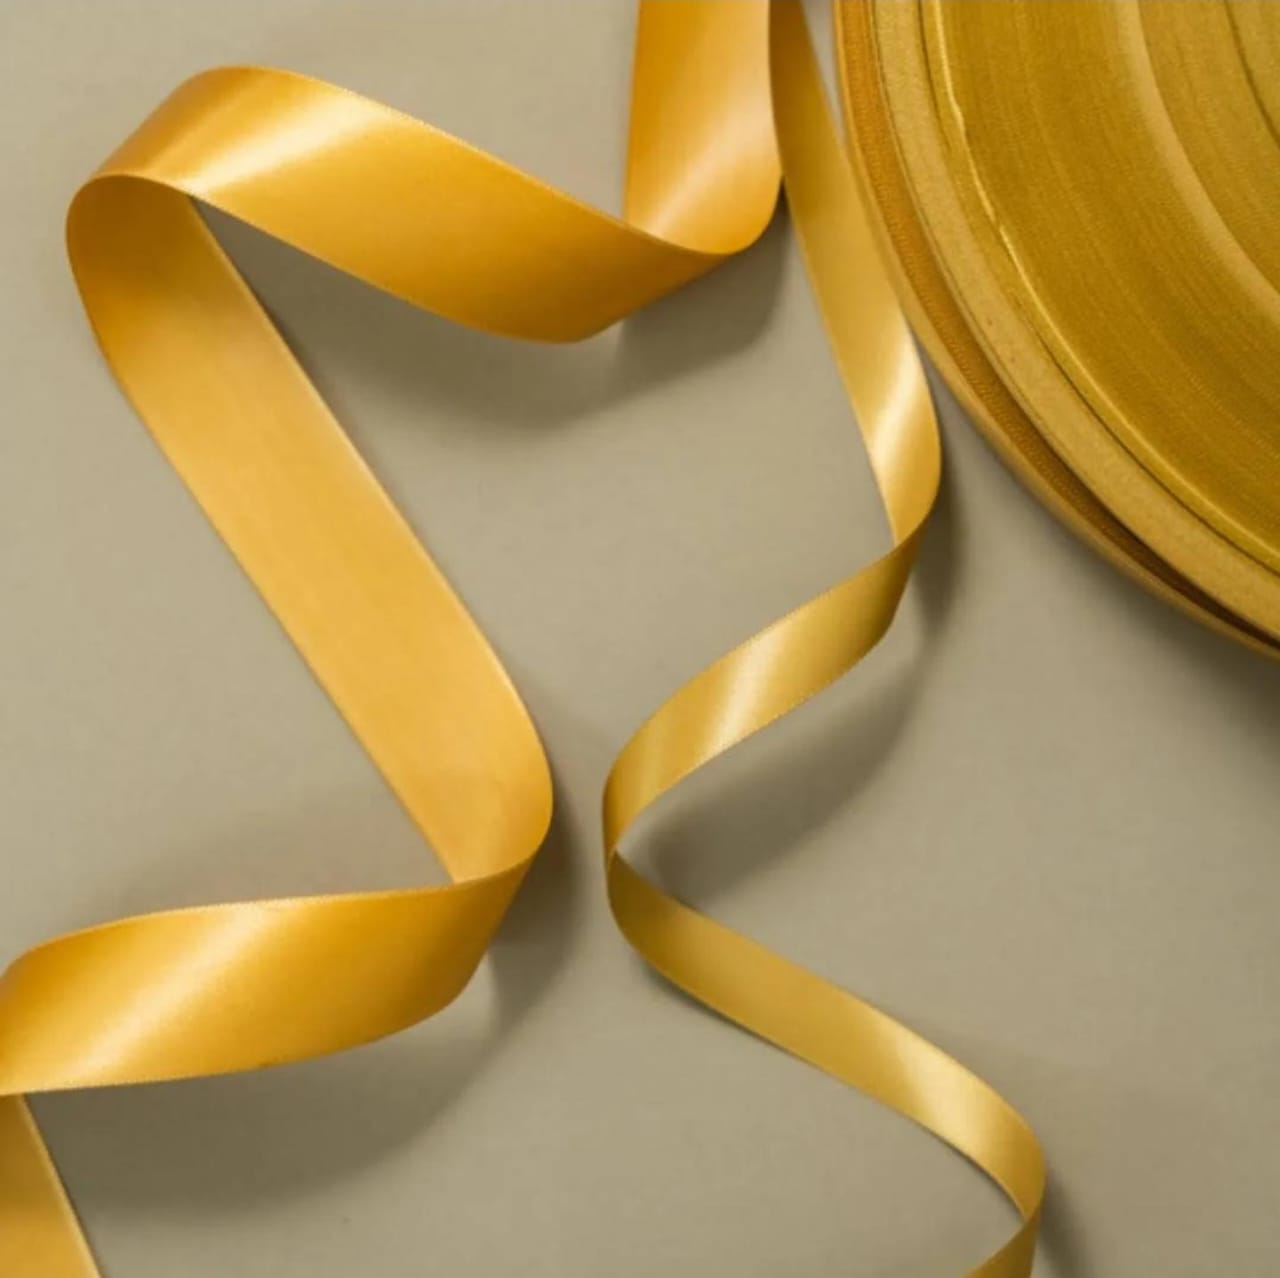 Eva party shop GOLDEN Peach 1-Inch Plastic Curling Ribbon - Perfect for Gift Wrapping (pack of 1)